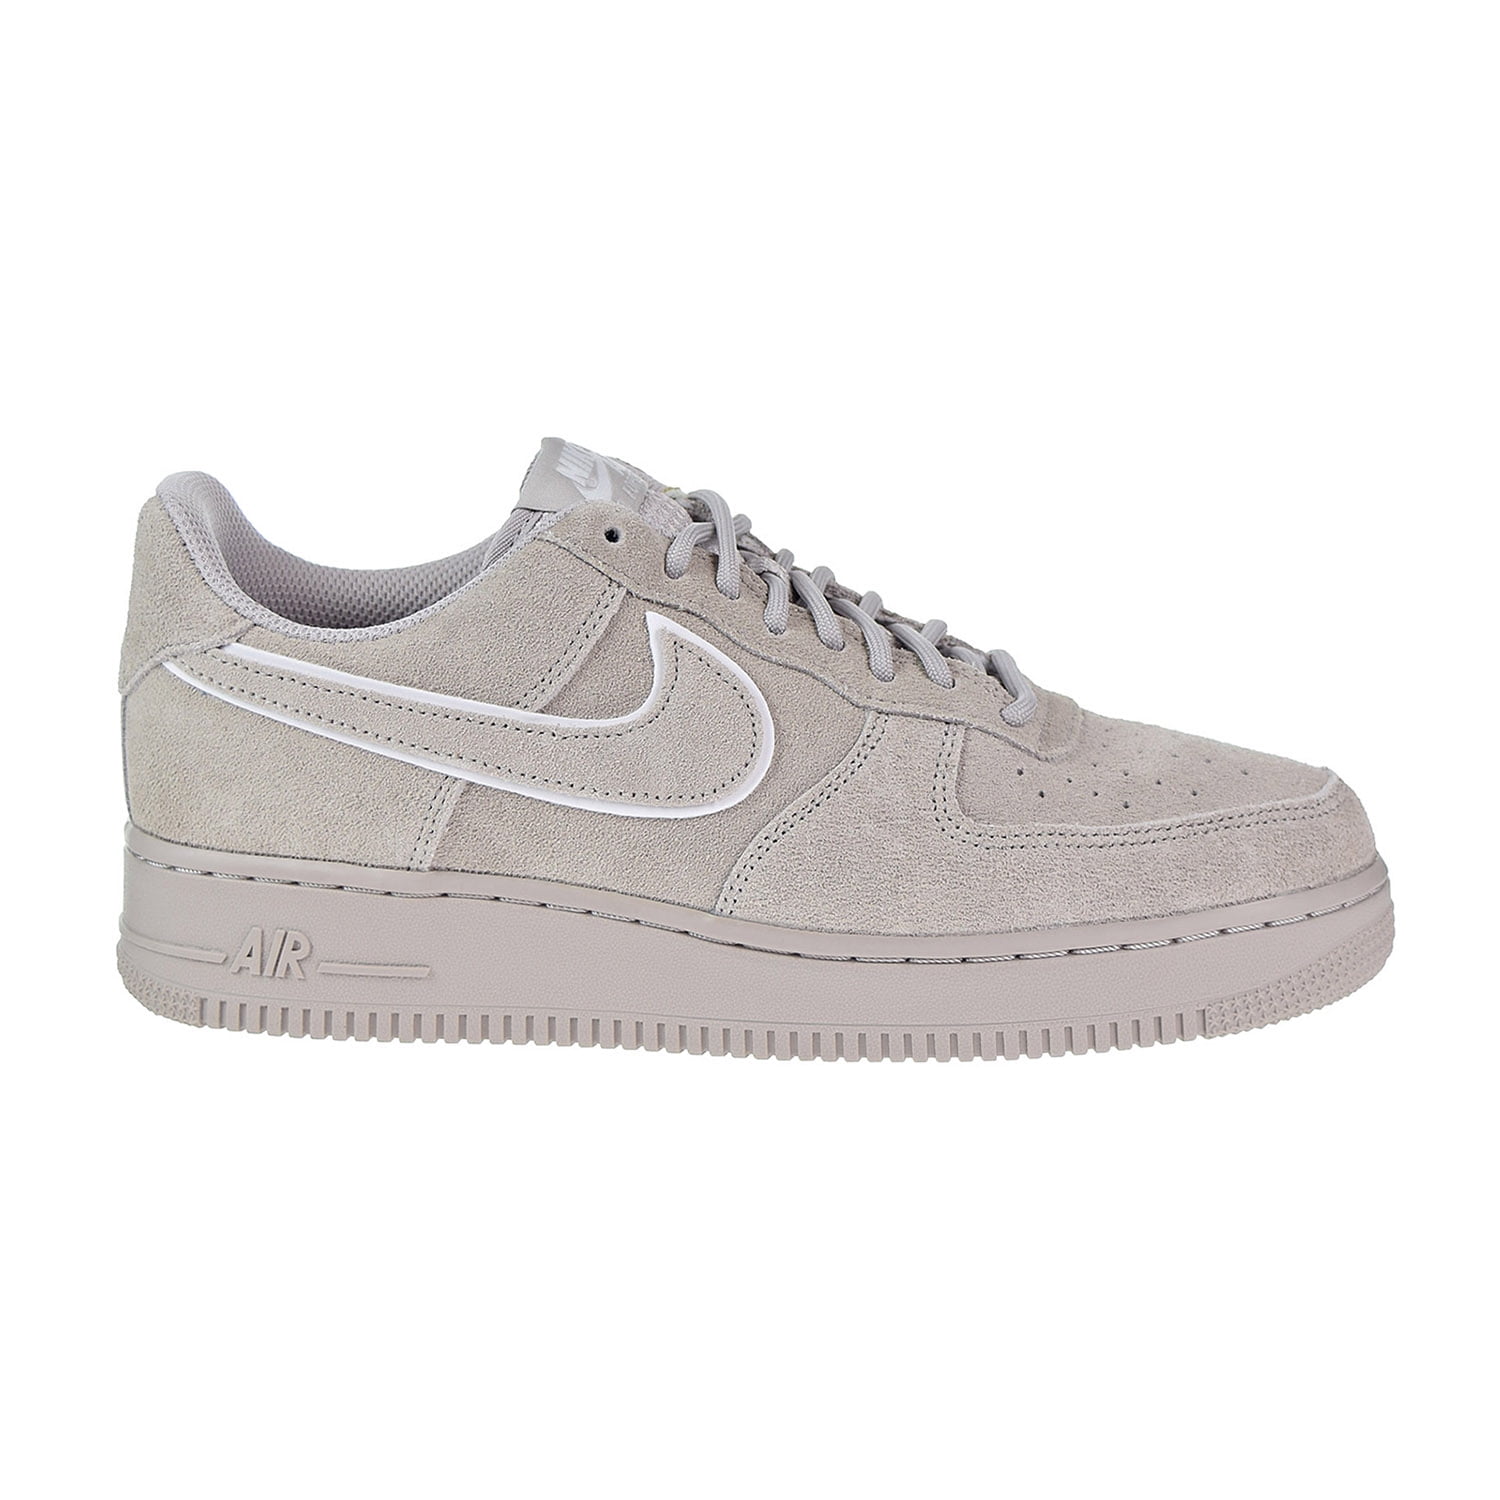 Sucio Igualmente Mediana Nike Air Force 1 '07 LV8 Suede Men's Running Shoes Moon Particle/Moon  Particle aa1117-201 - Walmart.com